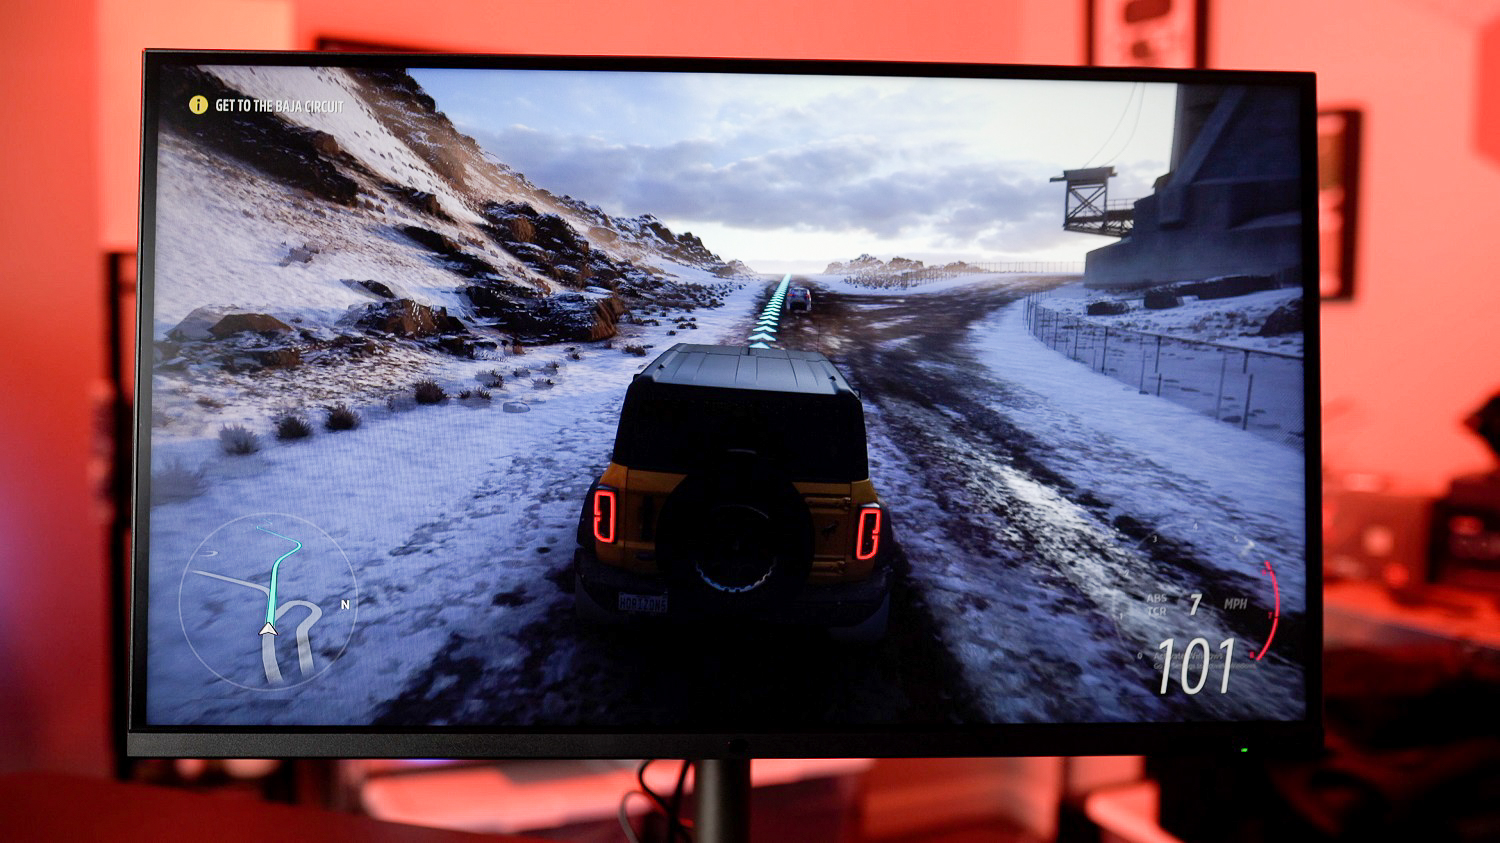 Samsung Odyssey G5 Gaming Screens in 27, 32 and 34 Sizes with High  Refresh Rates - TFTCentral